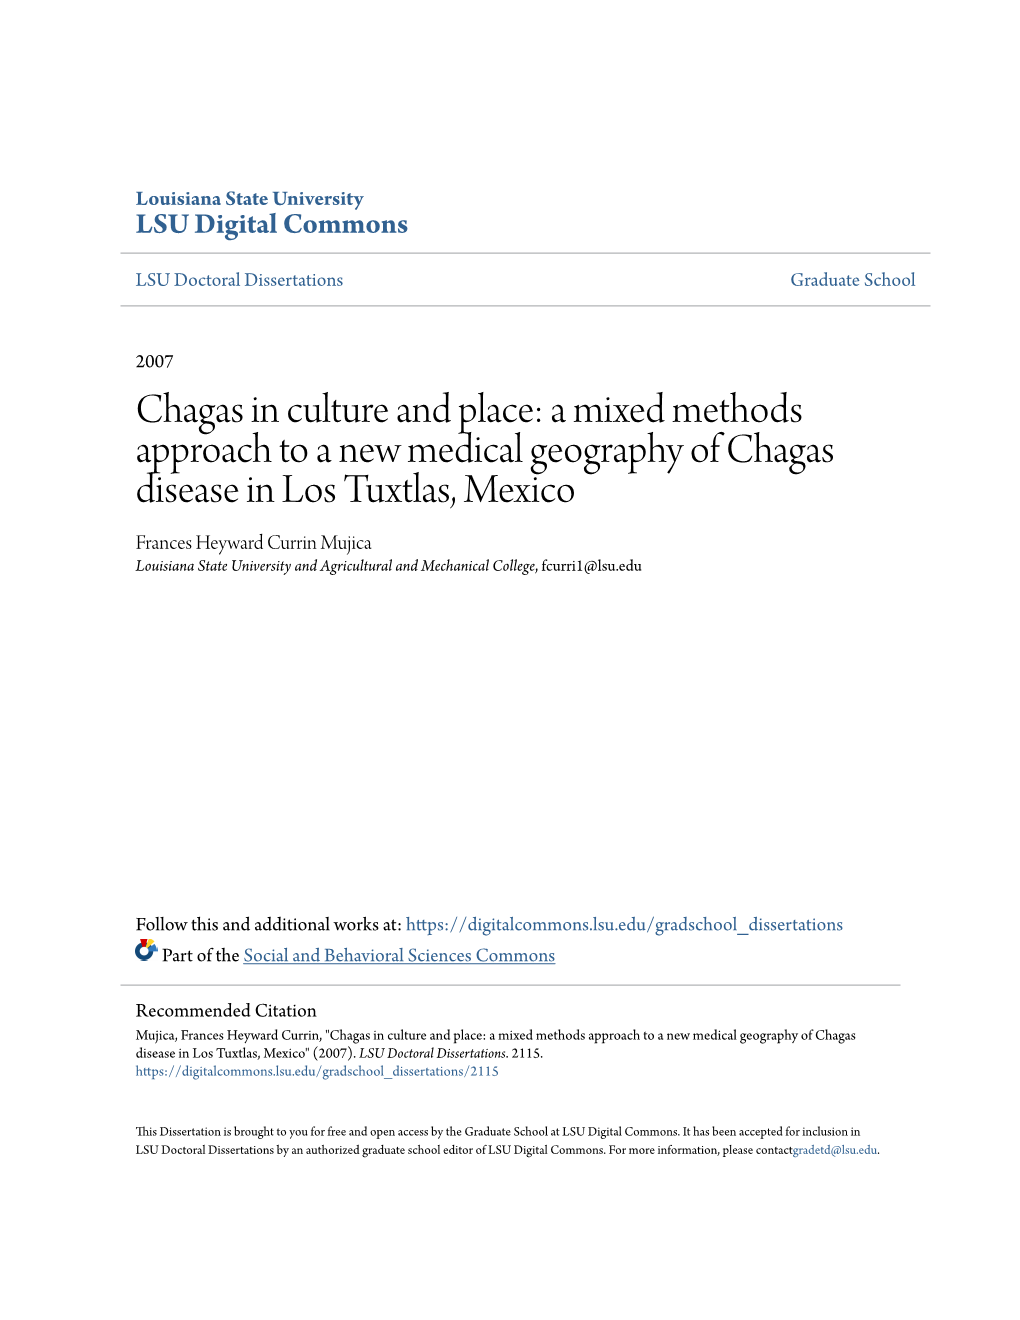 A Mixed Methods Approach to a New Medical Geography of Chagas